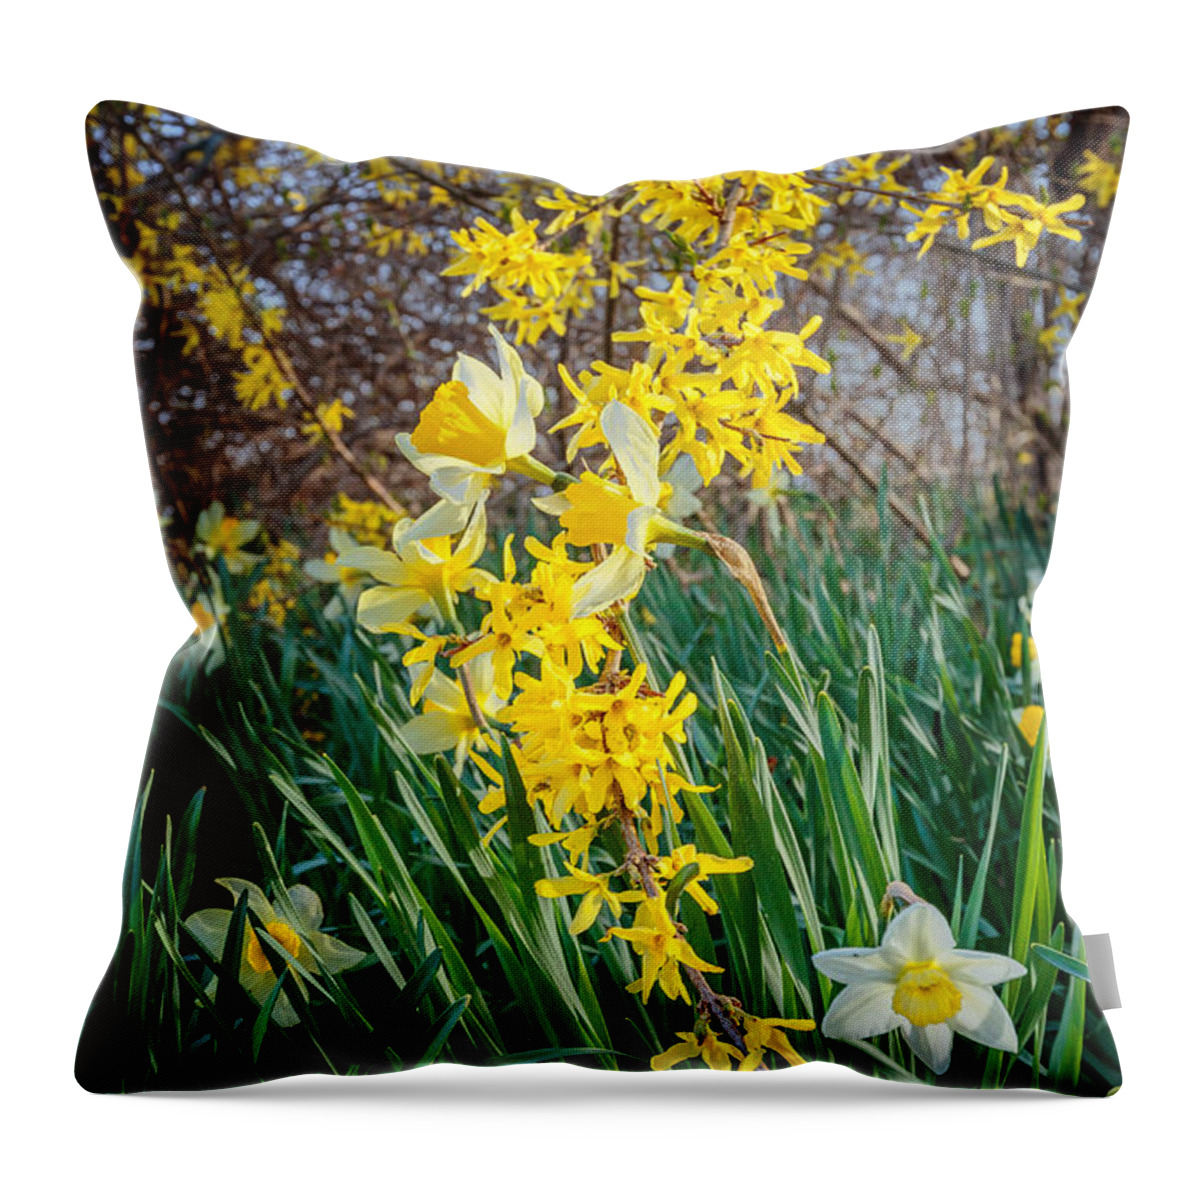 Daffodil Throw Pillow featuring the photograph Spring Floral by Bill Wakeley